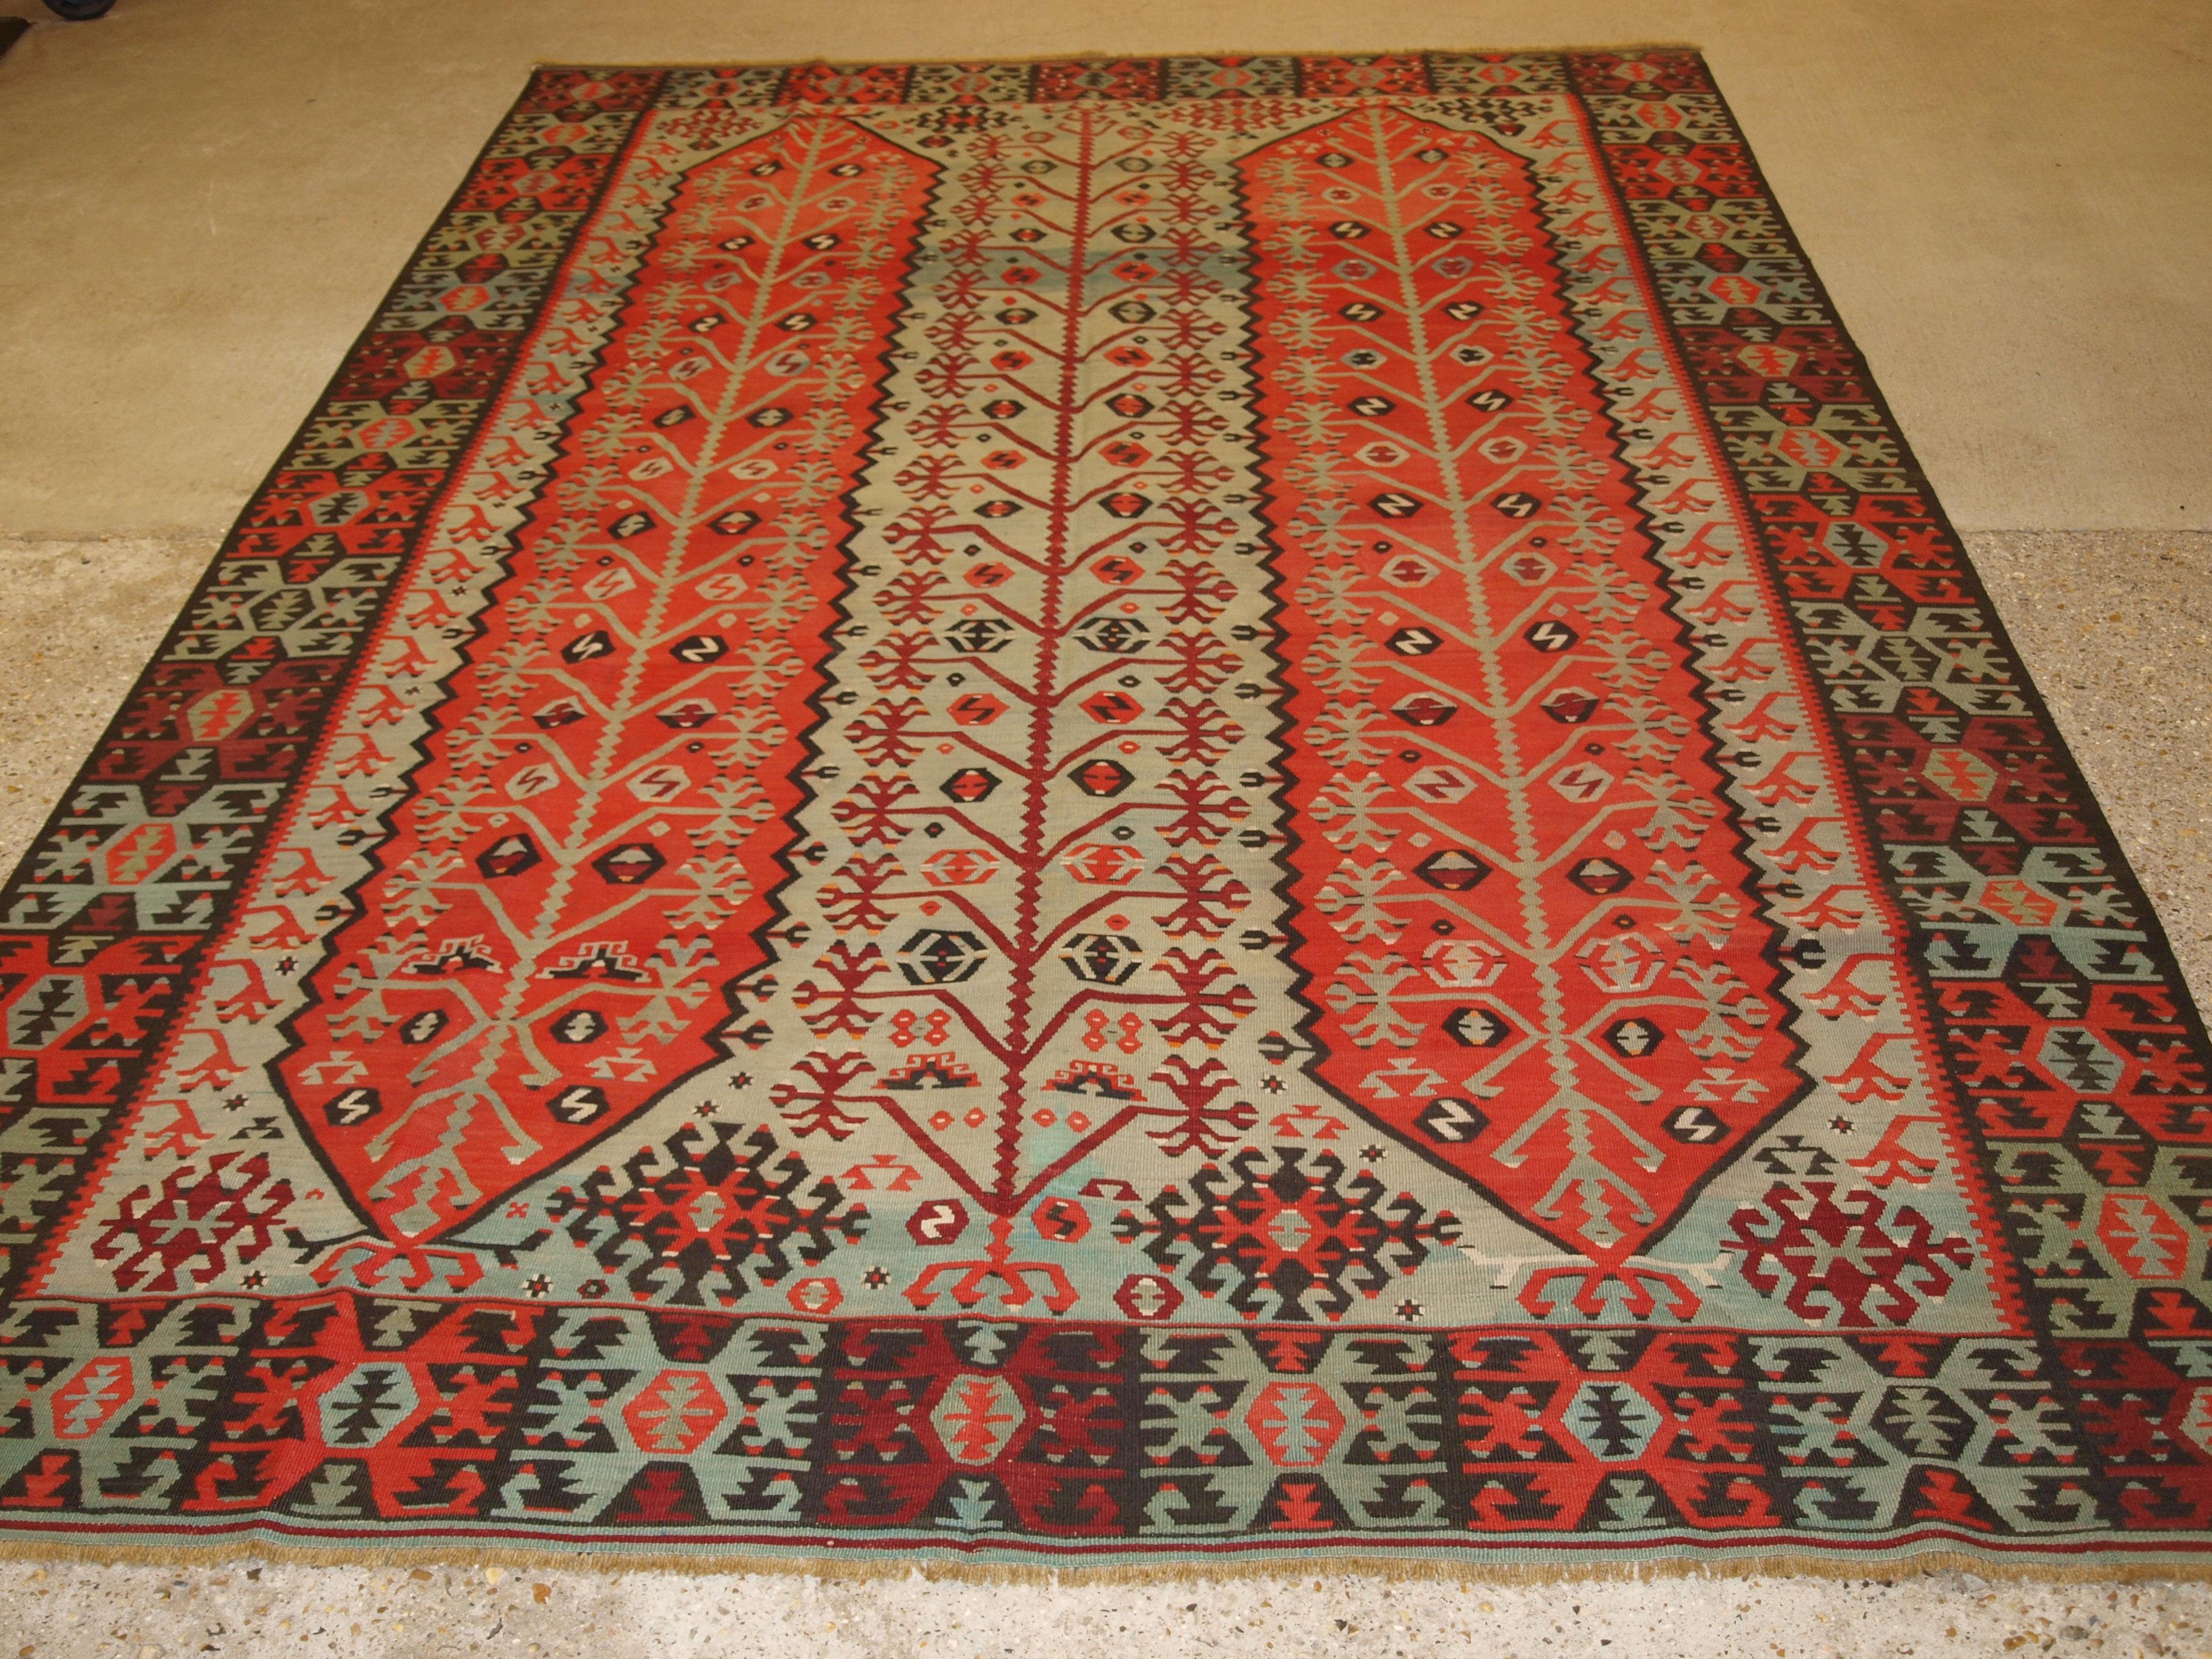 An antique Anatolian village kilim from the Sivas region of Central Eastern Turkey. The kilim has a most unusual and interesting design with a tree of life. Woven with a superb colour range of soft red, light indigo blue, green and